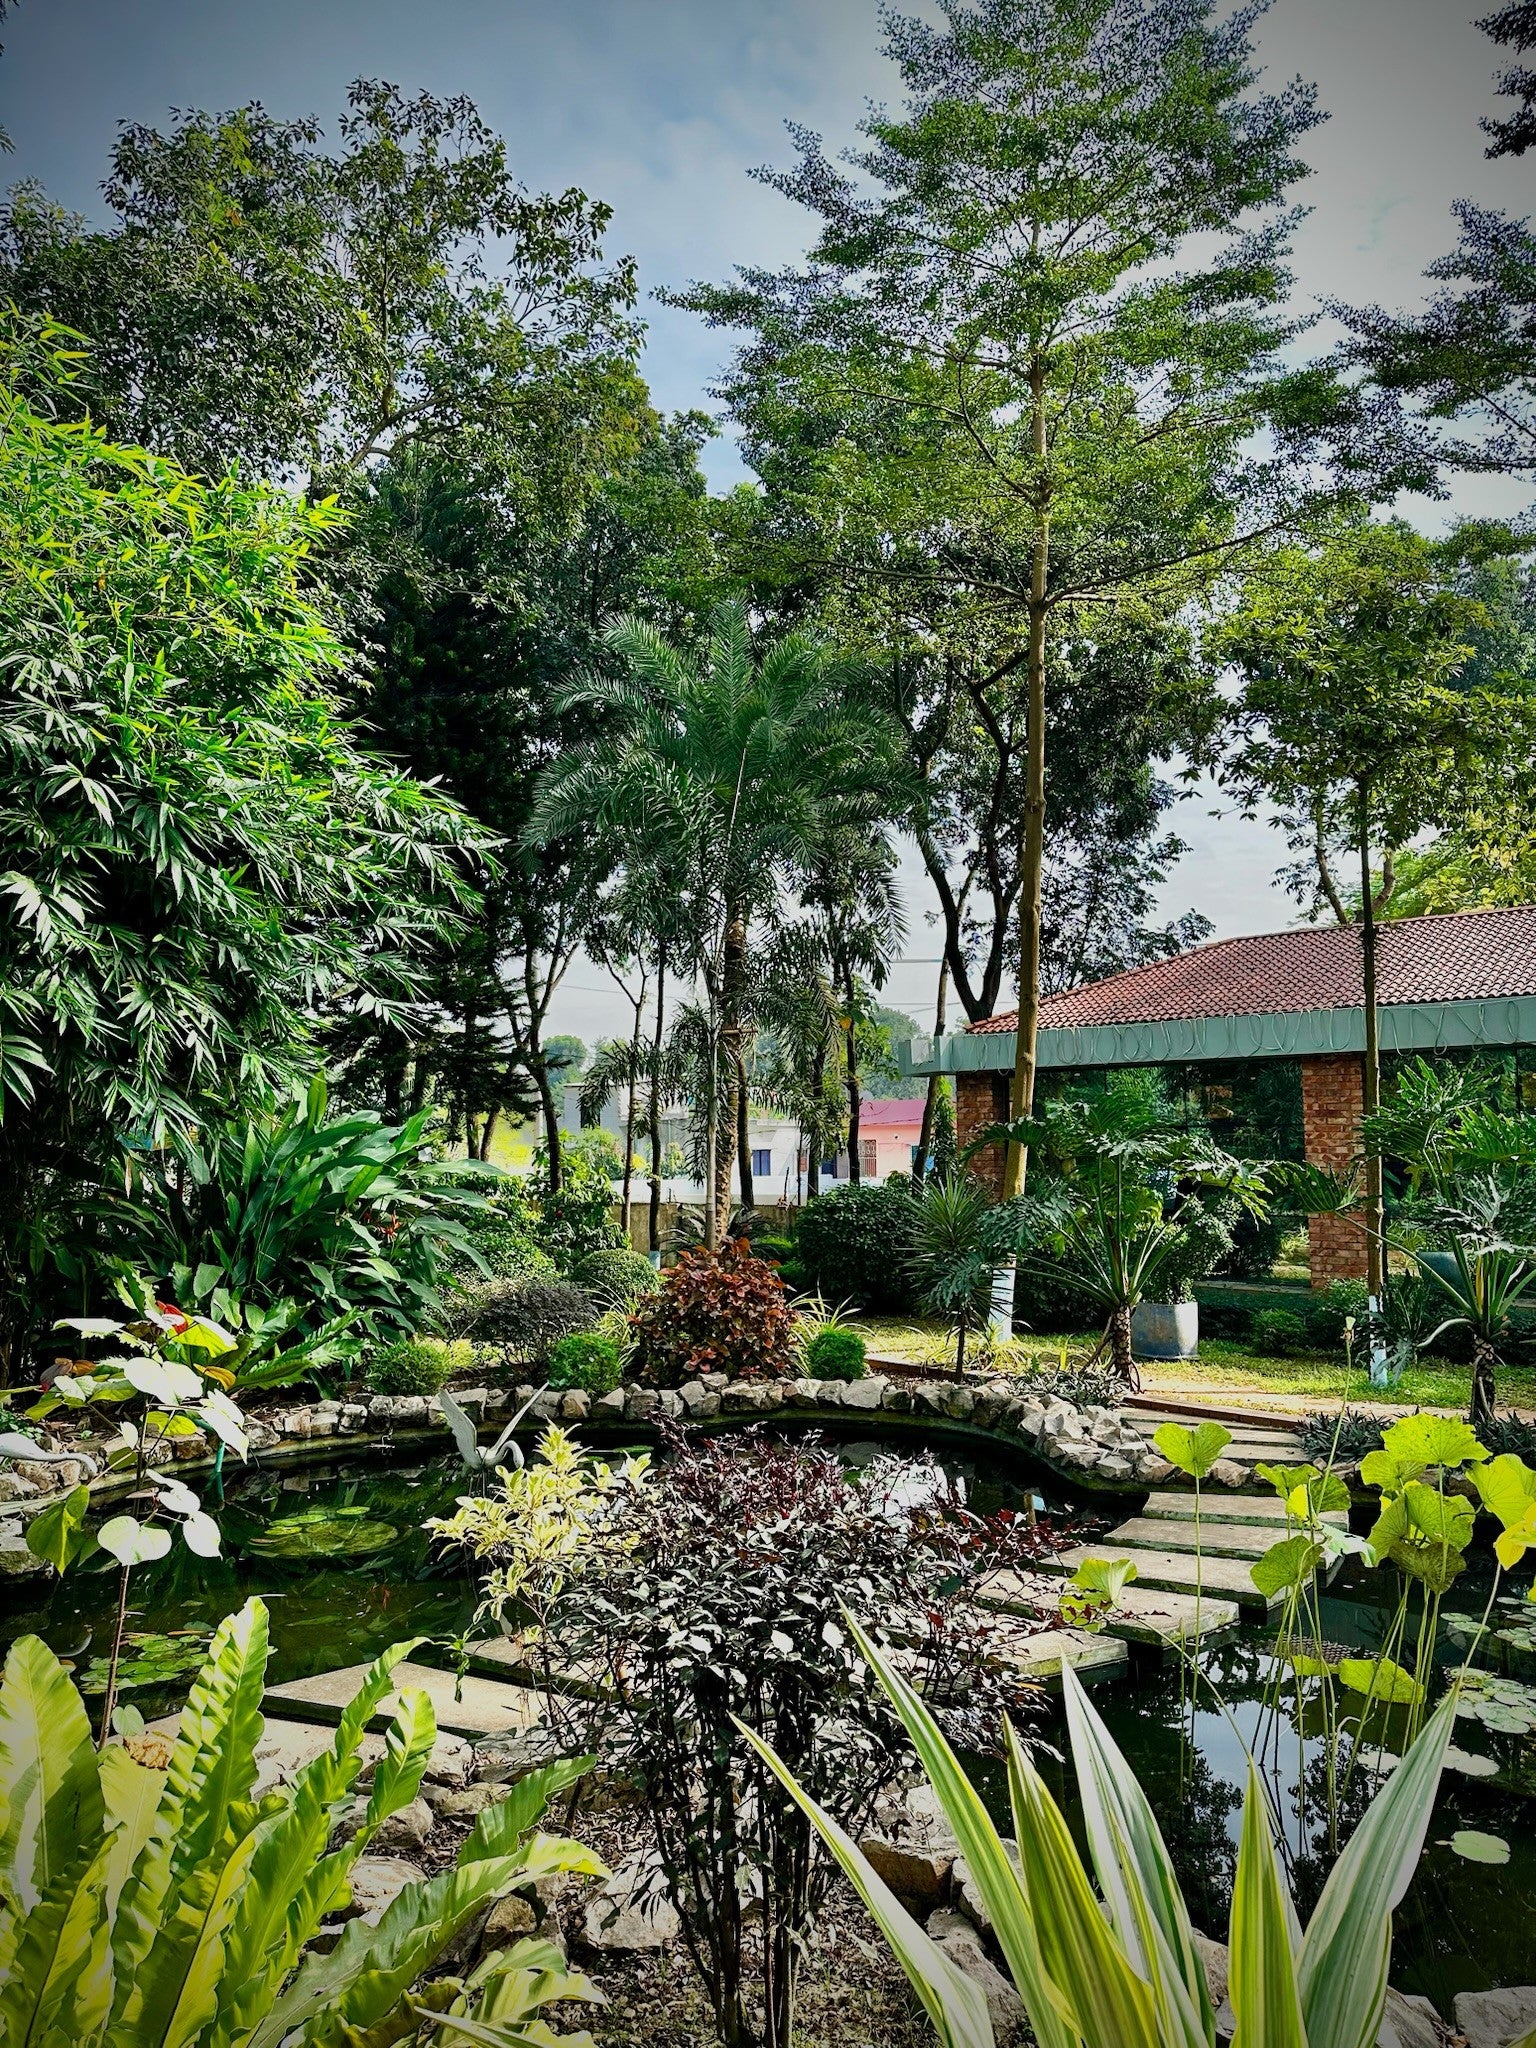 Idyllic pond with stepping stones at Barnochata, a peaceful resort and Dhaka hotel in Savar, surrounded by lush tropical vegetation.